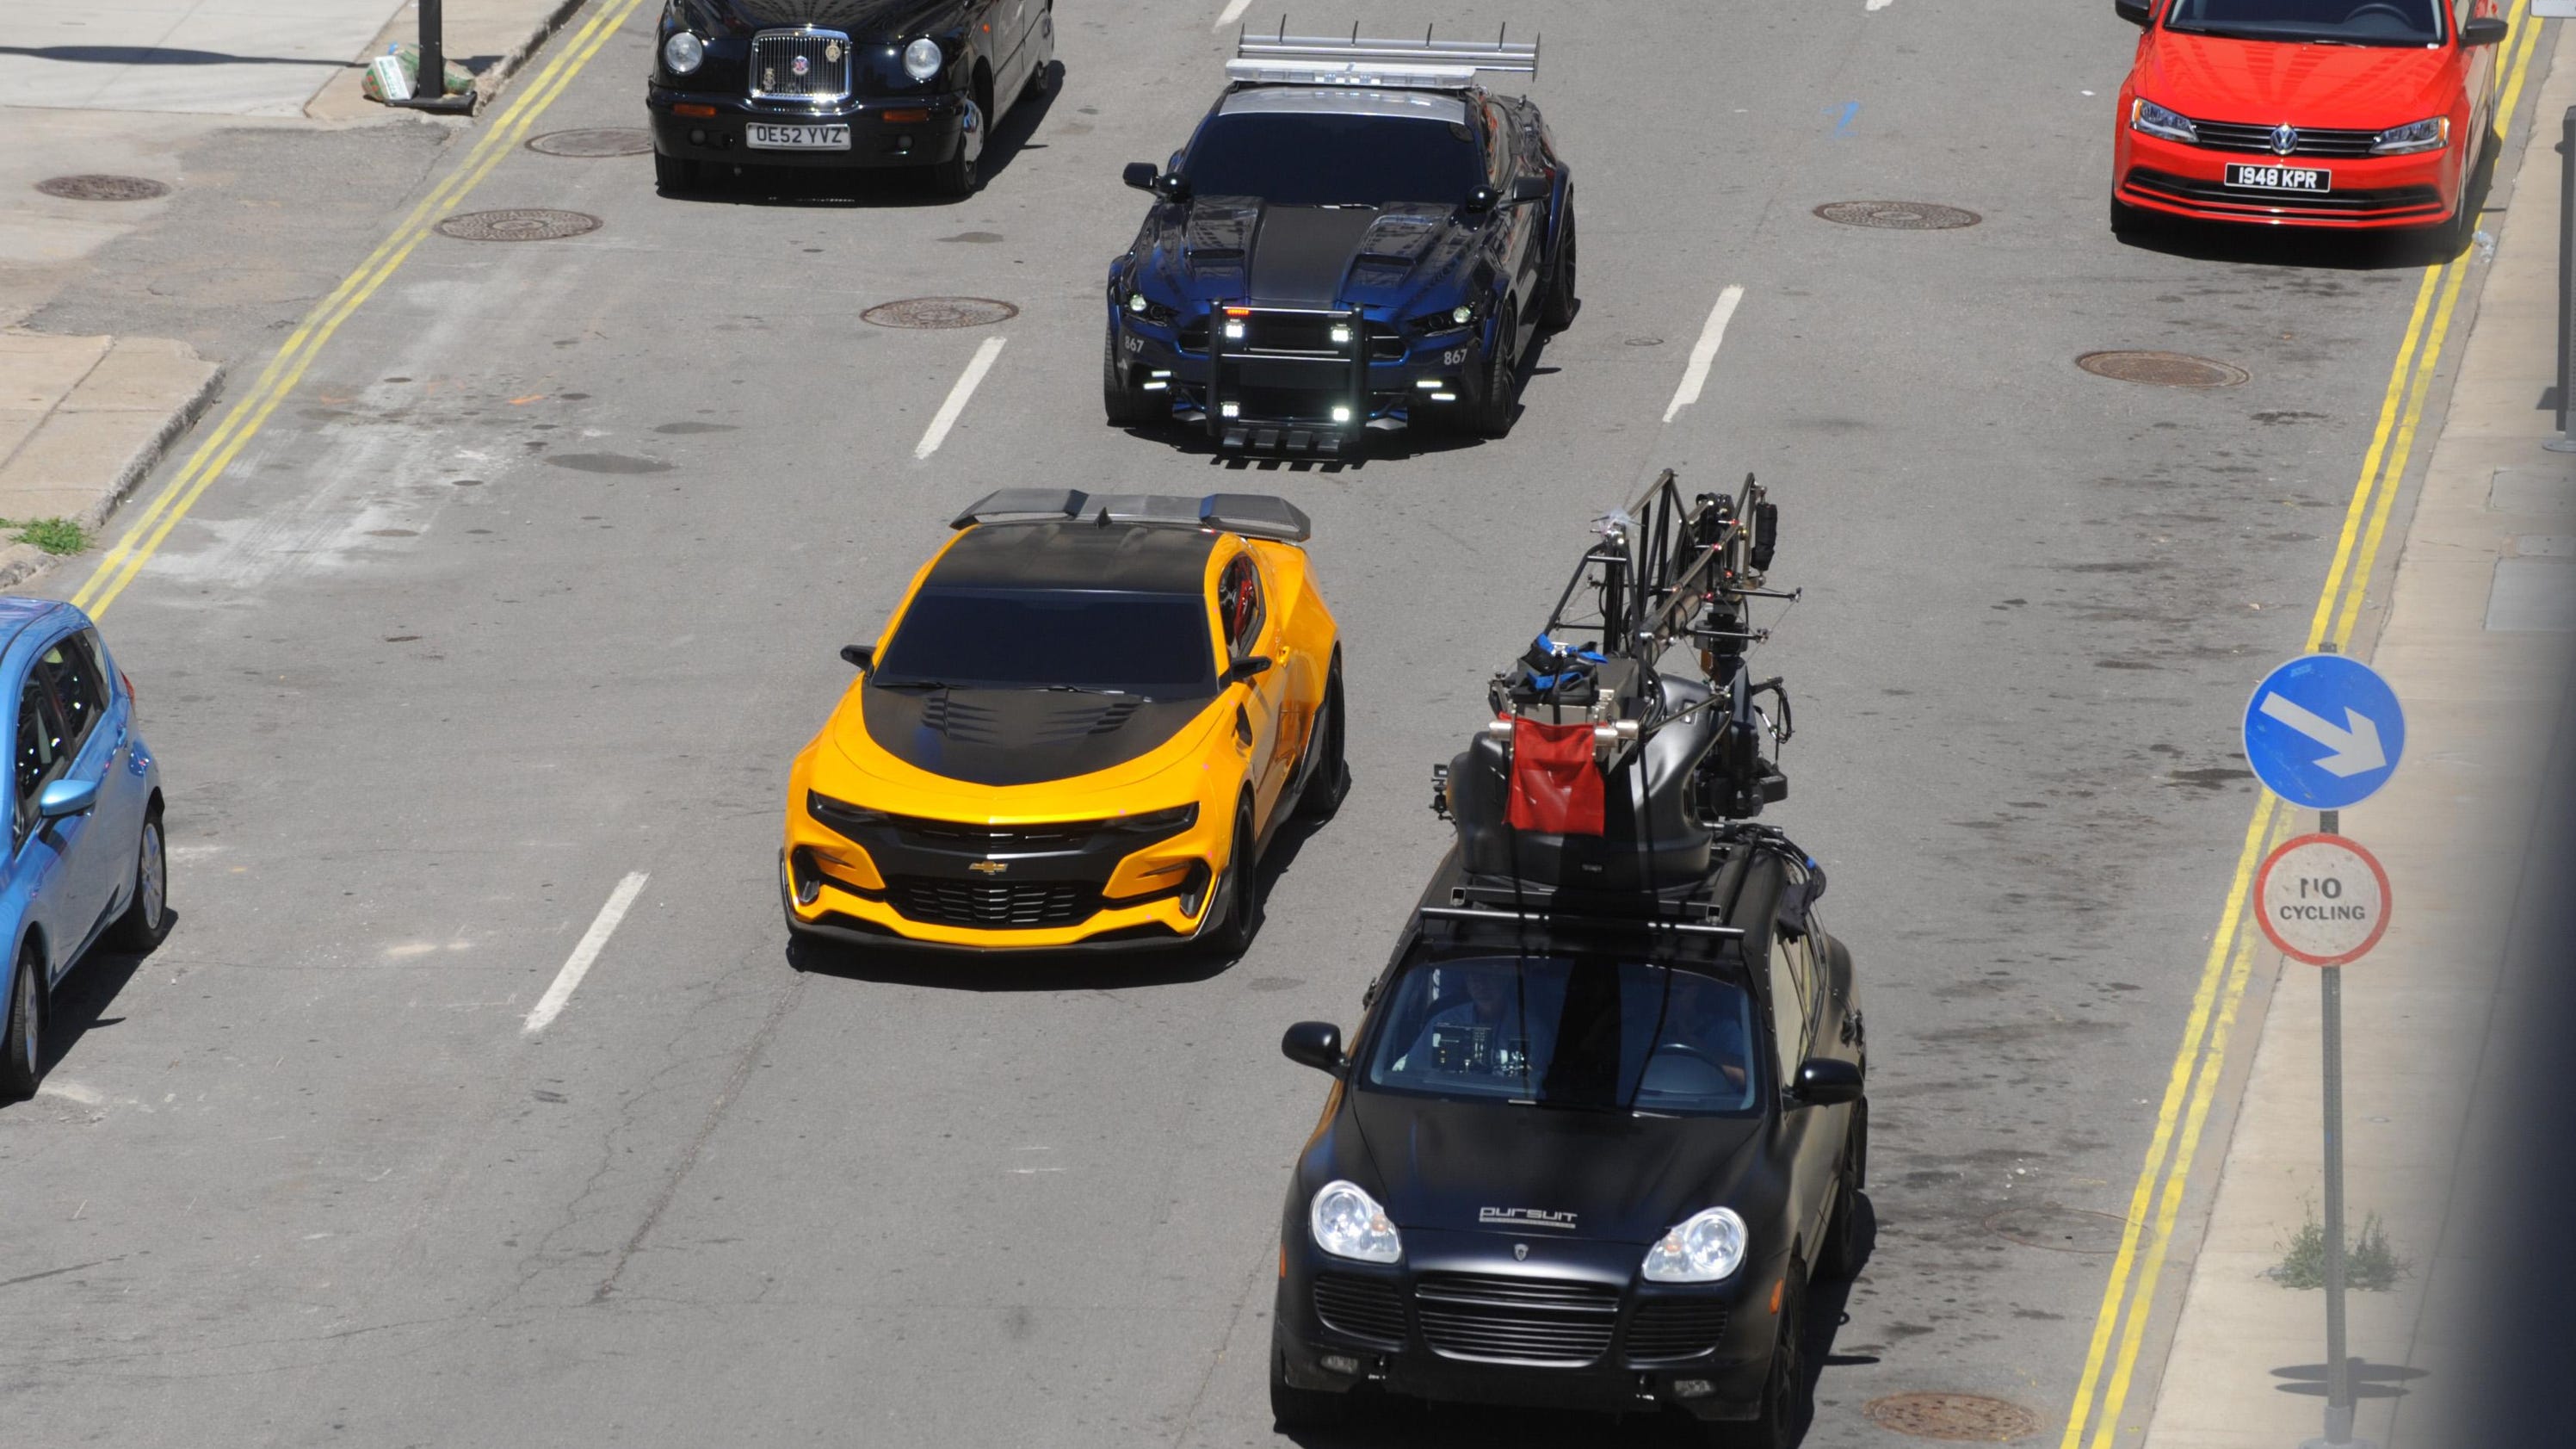 Fort St. becomes London street for ‘Transformers’ shoot